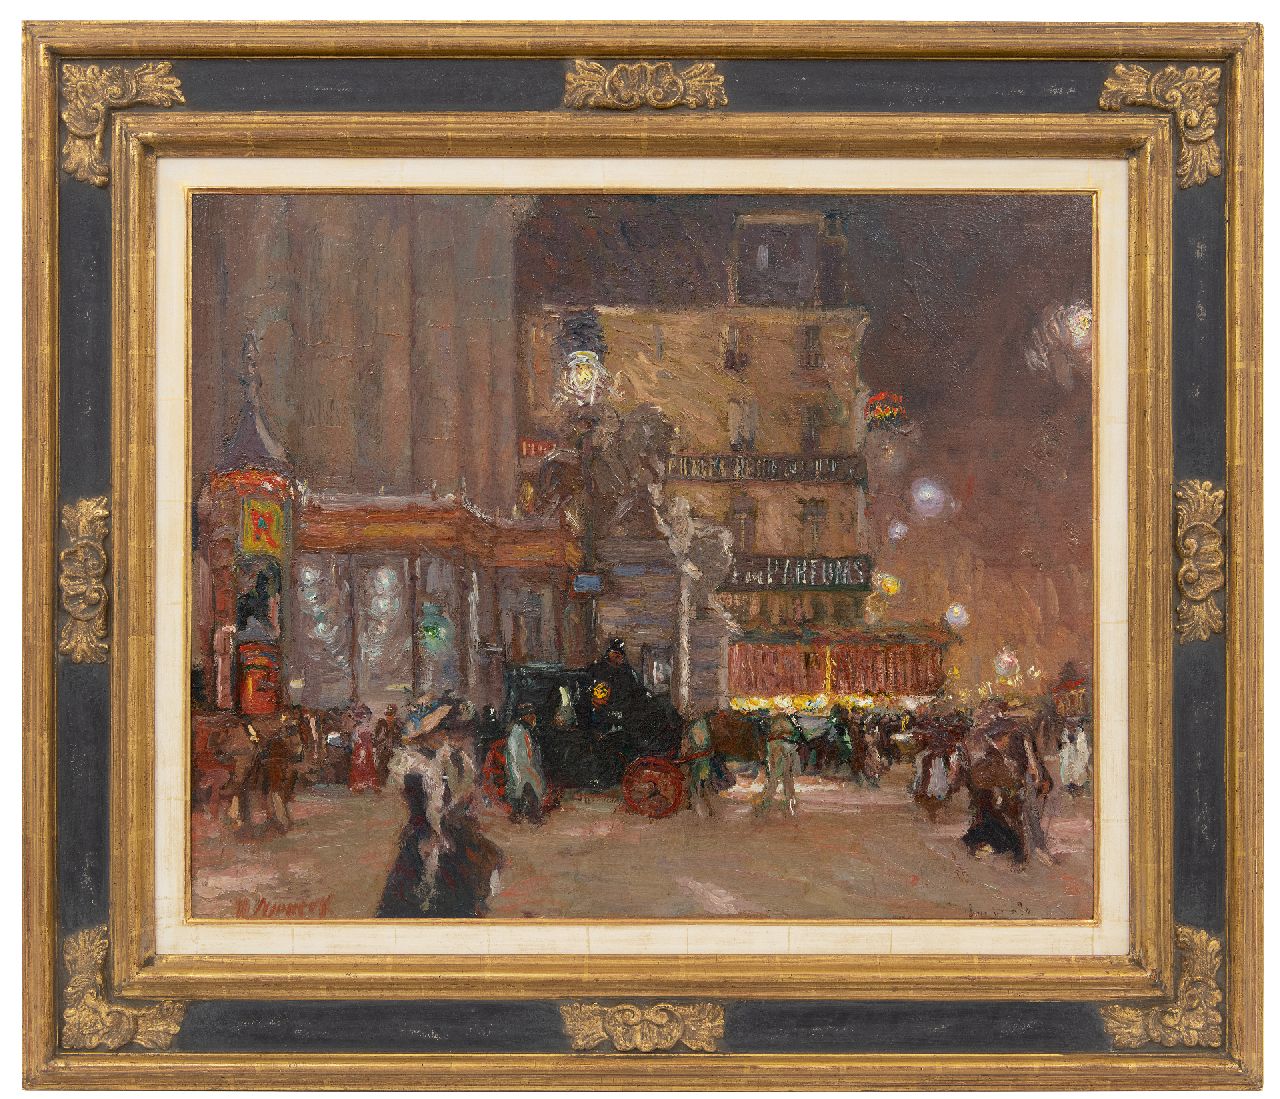 Niekerk M.J.  | 'Maurits' Joseph Niekerk | Paintings offered for sale | A night out in Brussels at the Place de la Bourse, oil on canvas laid down on panel 55.9 x 70.0 cm, signed l.l. and painted ca. 1903-1908